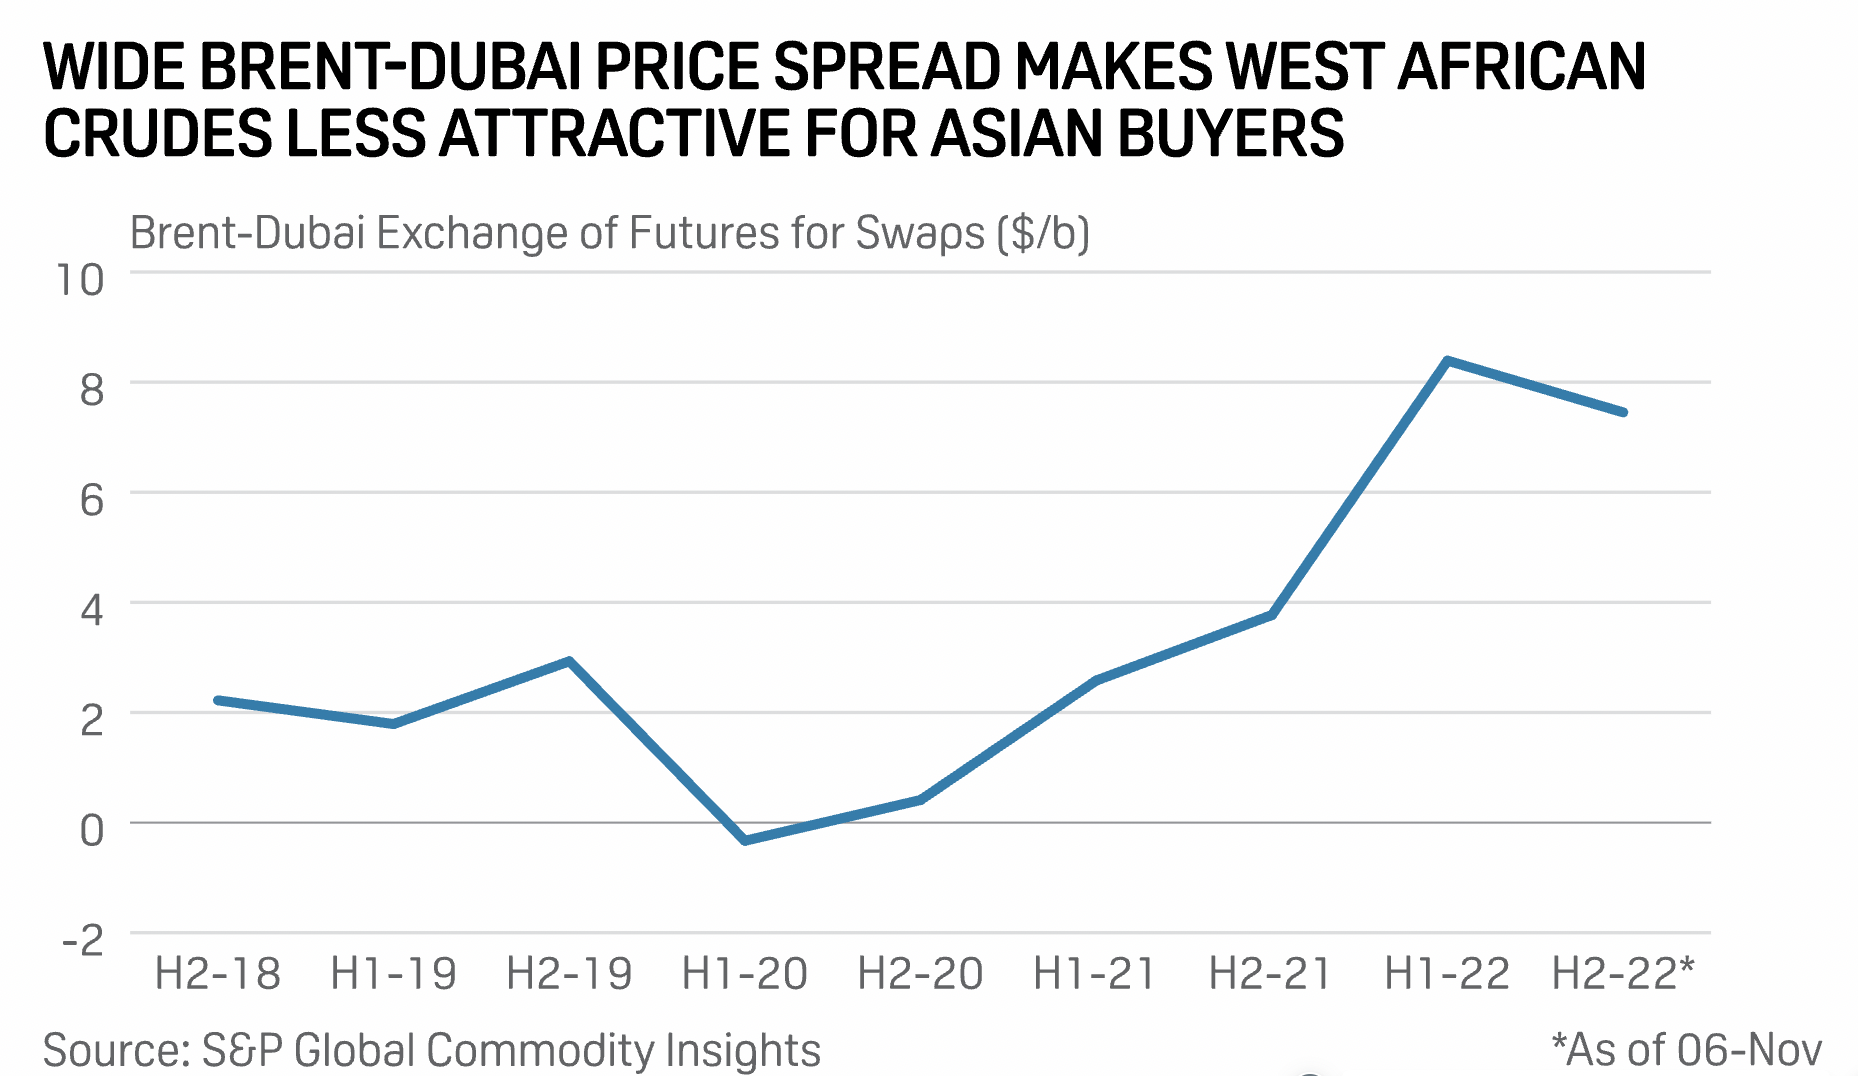 S&P Global Commodity Insights: Asia's appetite for African crude slows as Ukraine conflict redraws trade flows